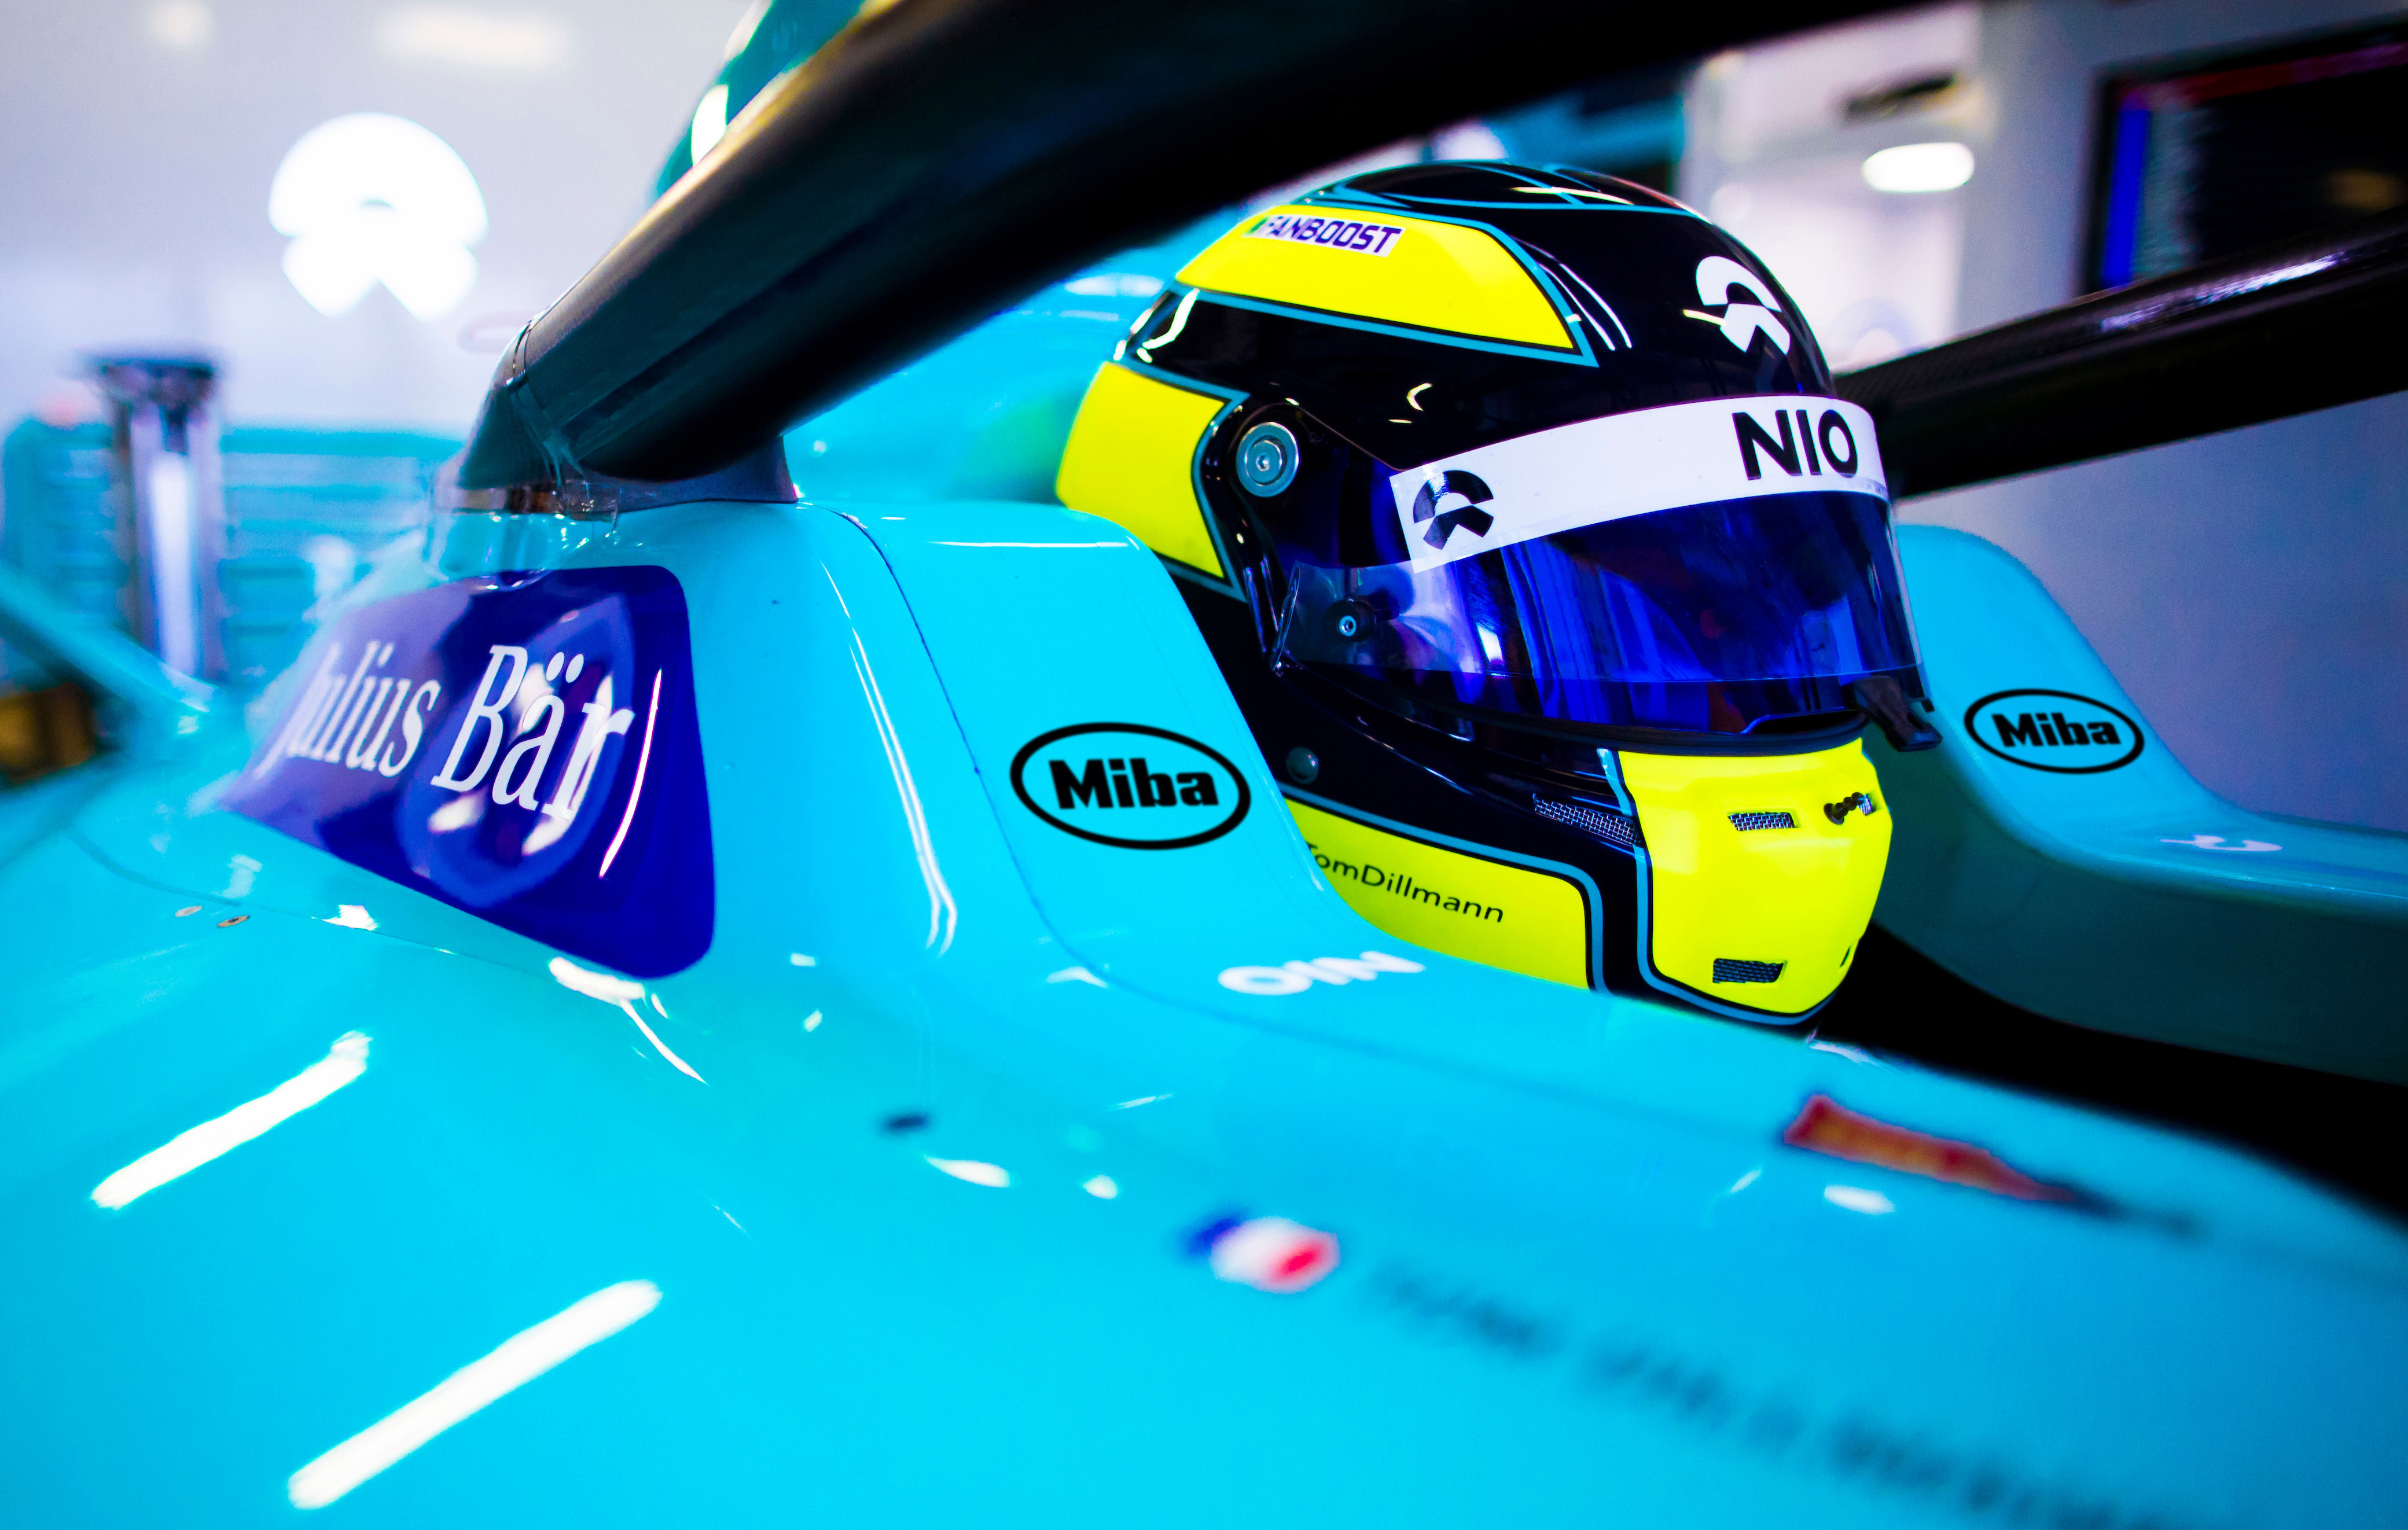 Miba says that it has supplied a wide range of products for Formula E electric vehicles.